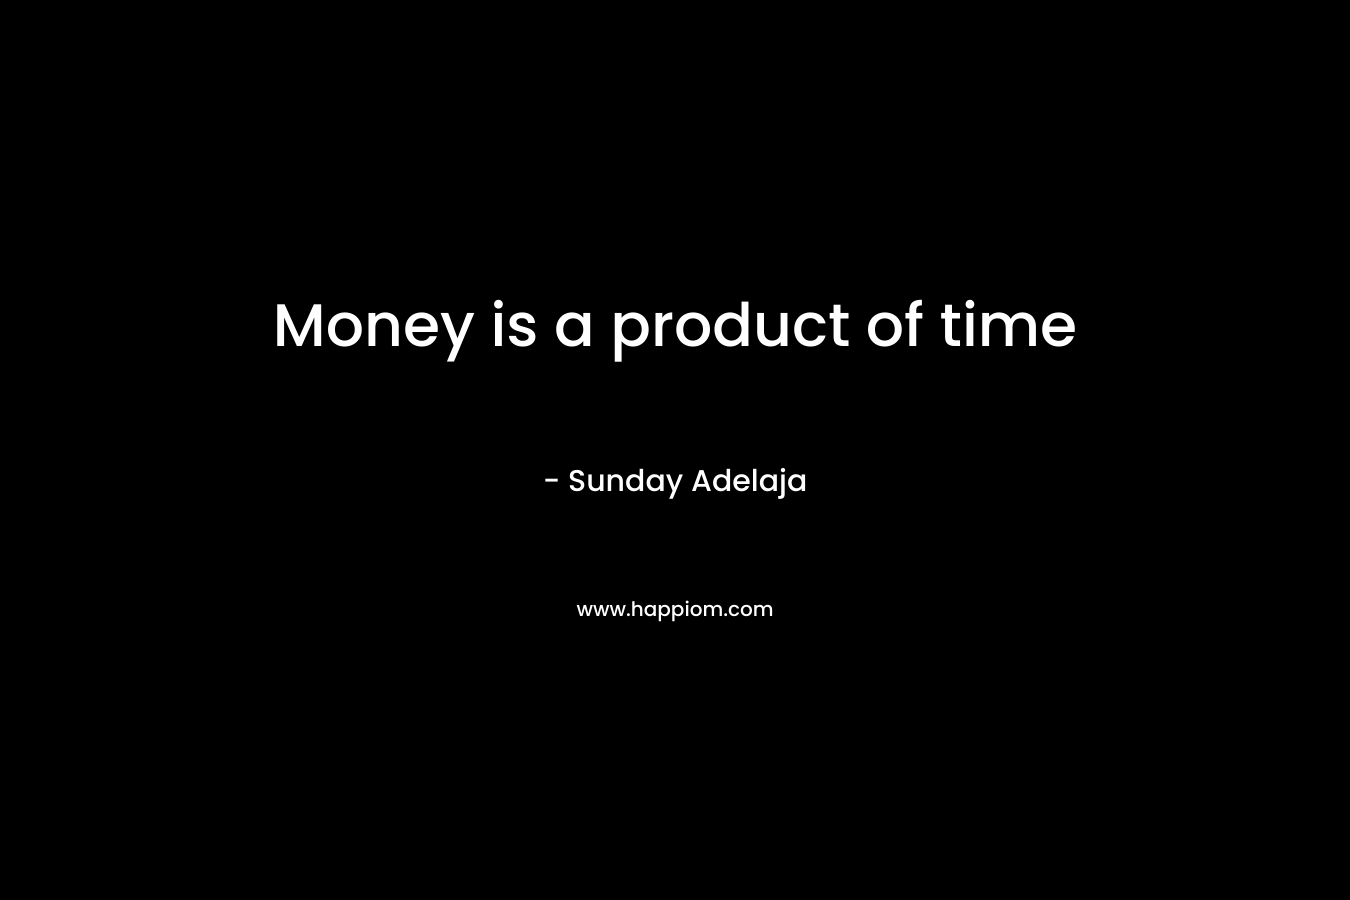 Money is a product of time